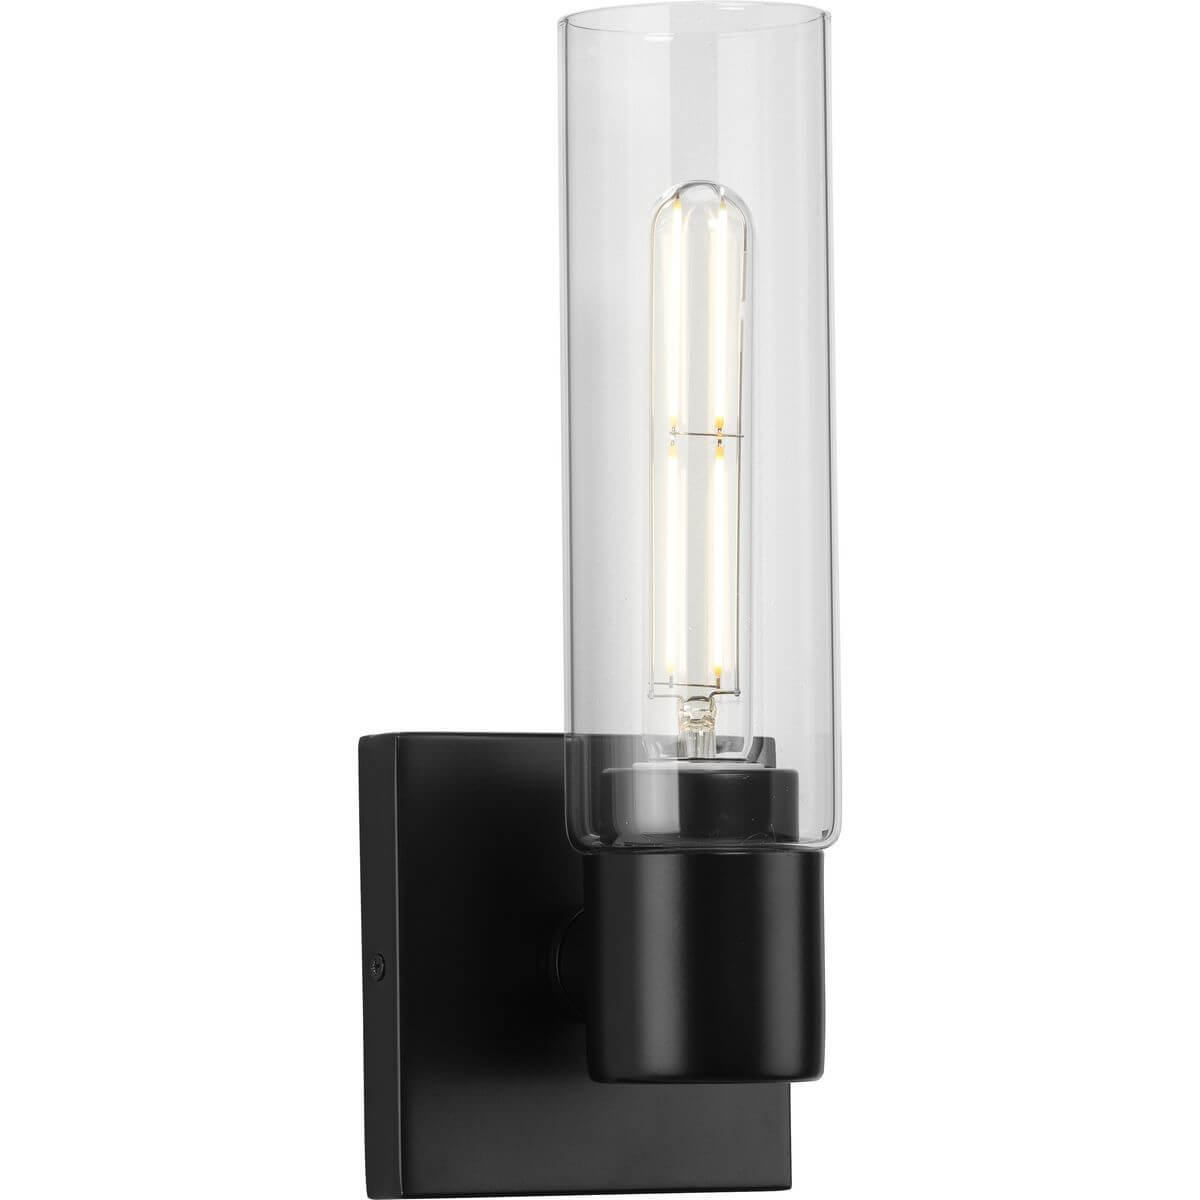 Progress Lighting Clarion 1 Light 13 inch Tall Bath Vanity Light in Matte Black with Clear Glass P300299-031